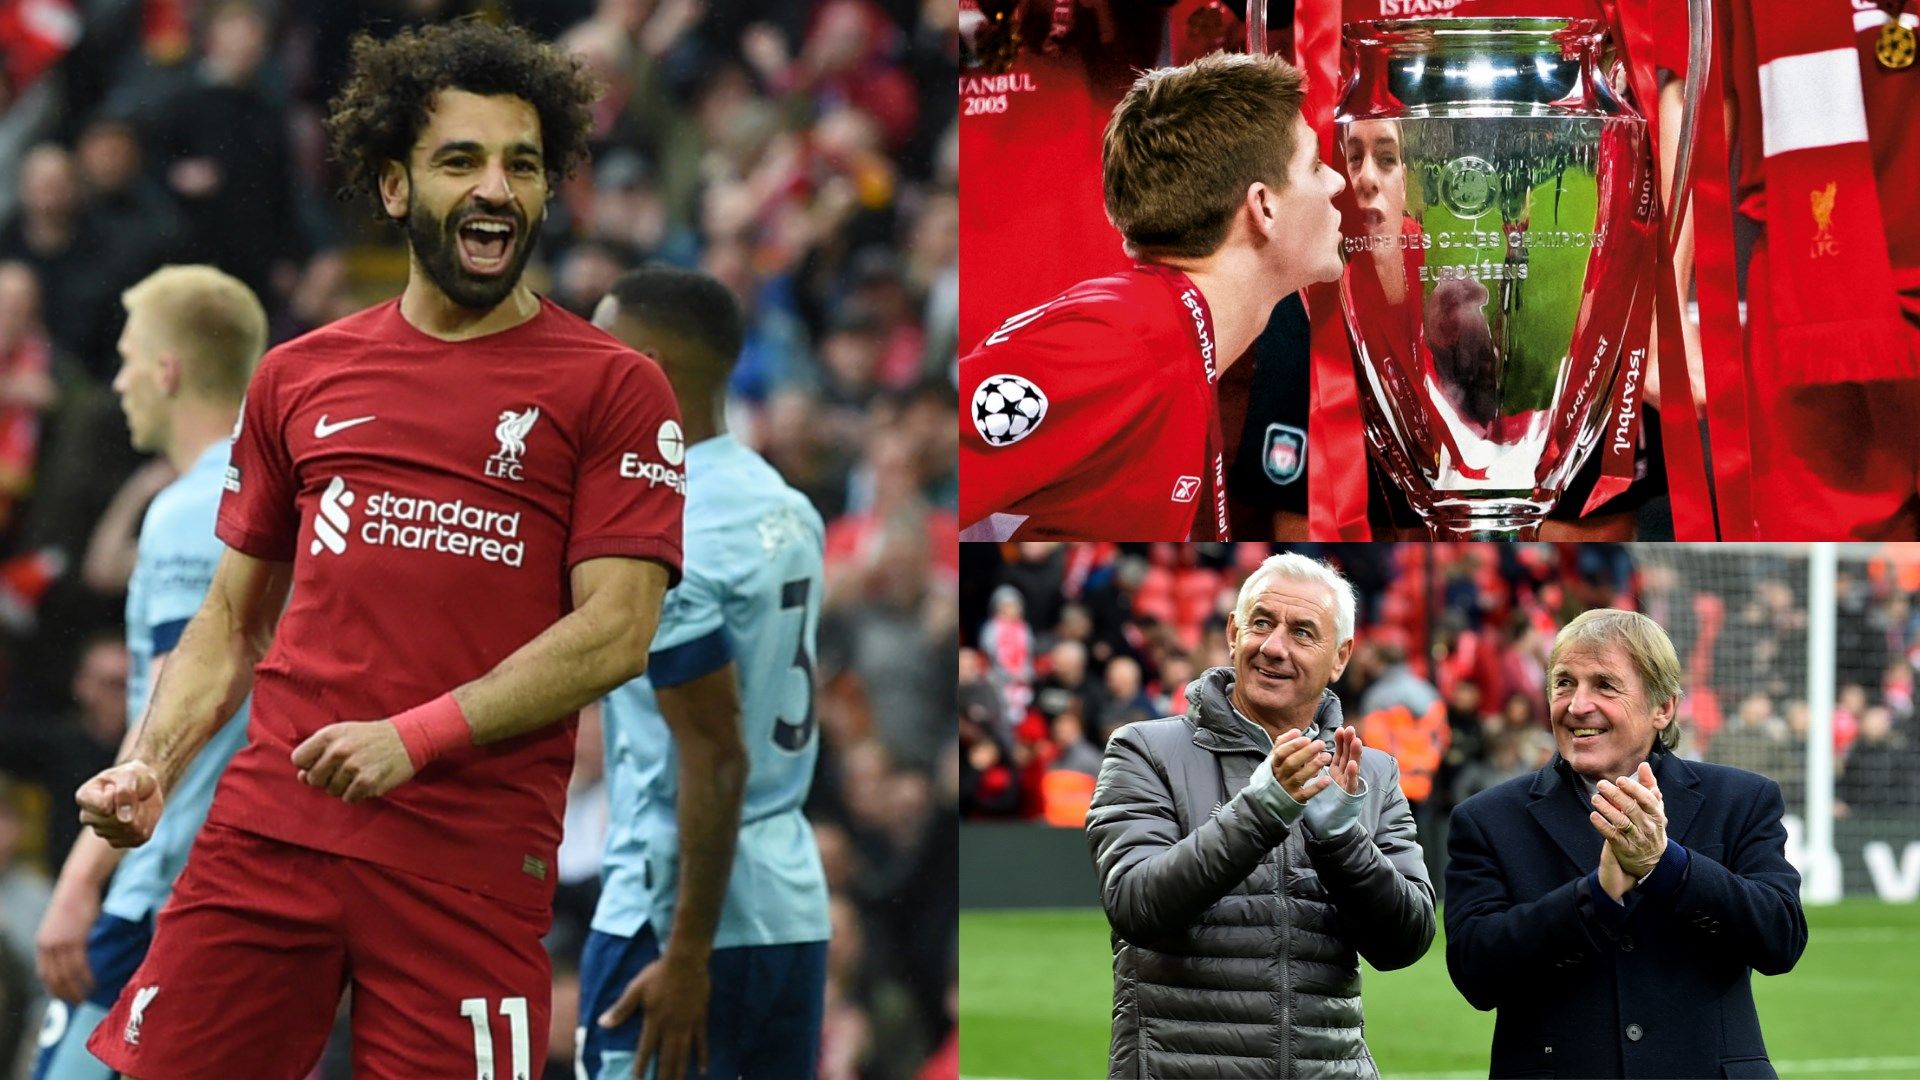 Liverpool legend names the one player whose departure would be a 'bigger blow' than Salah - Comparison to the potential impact of Salah's departure